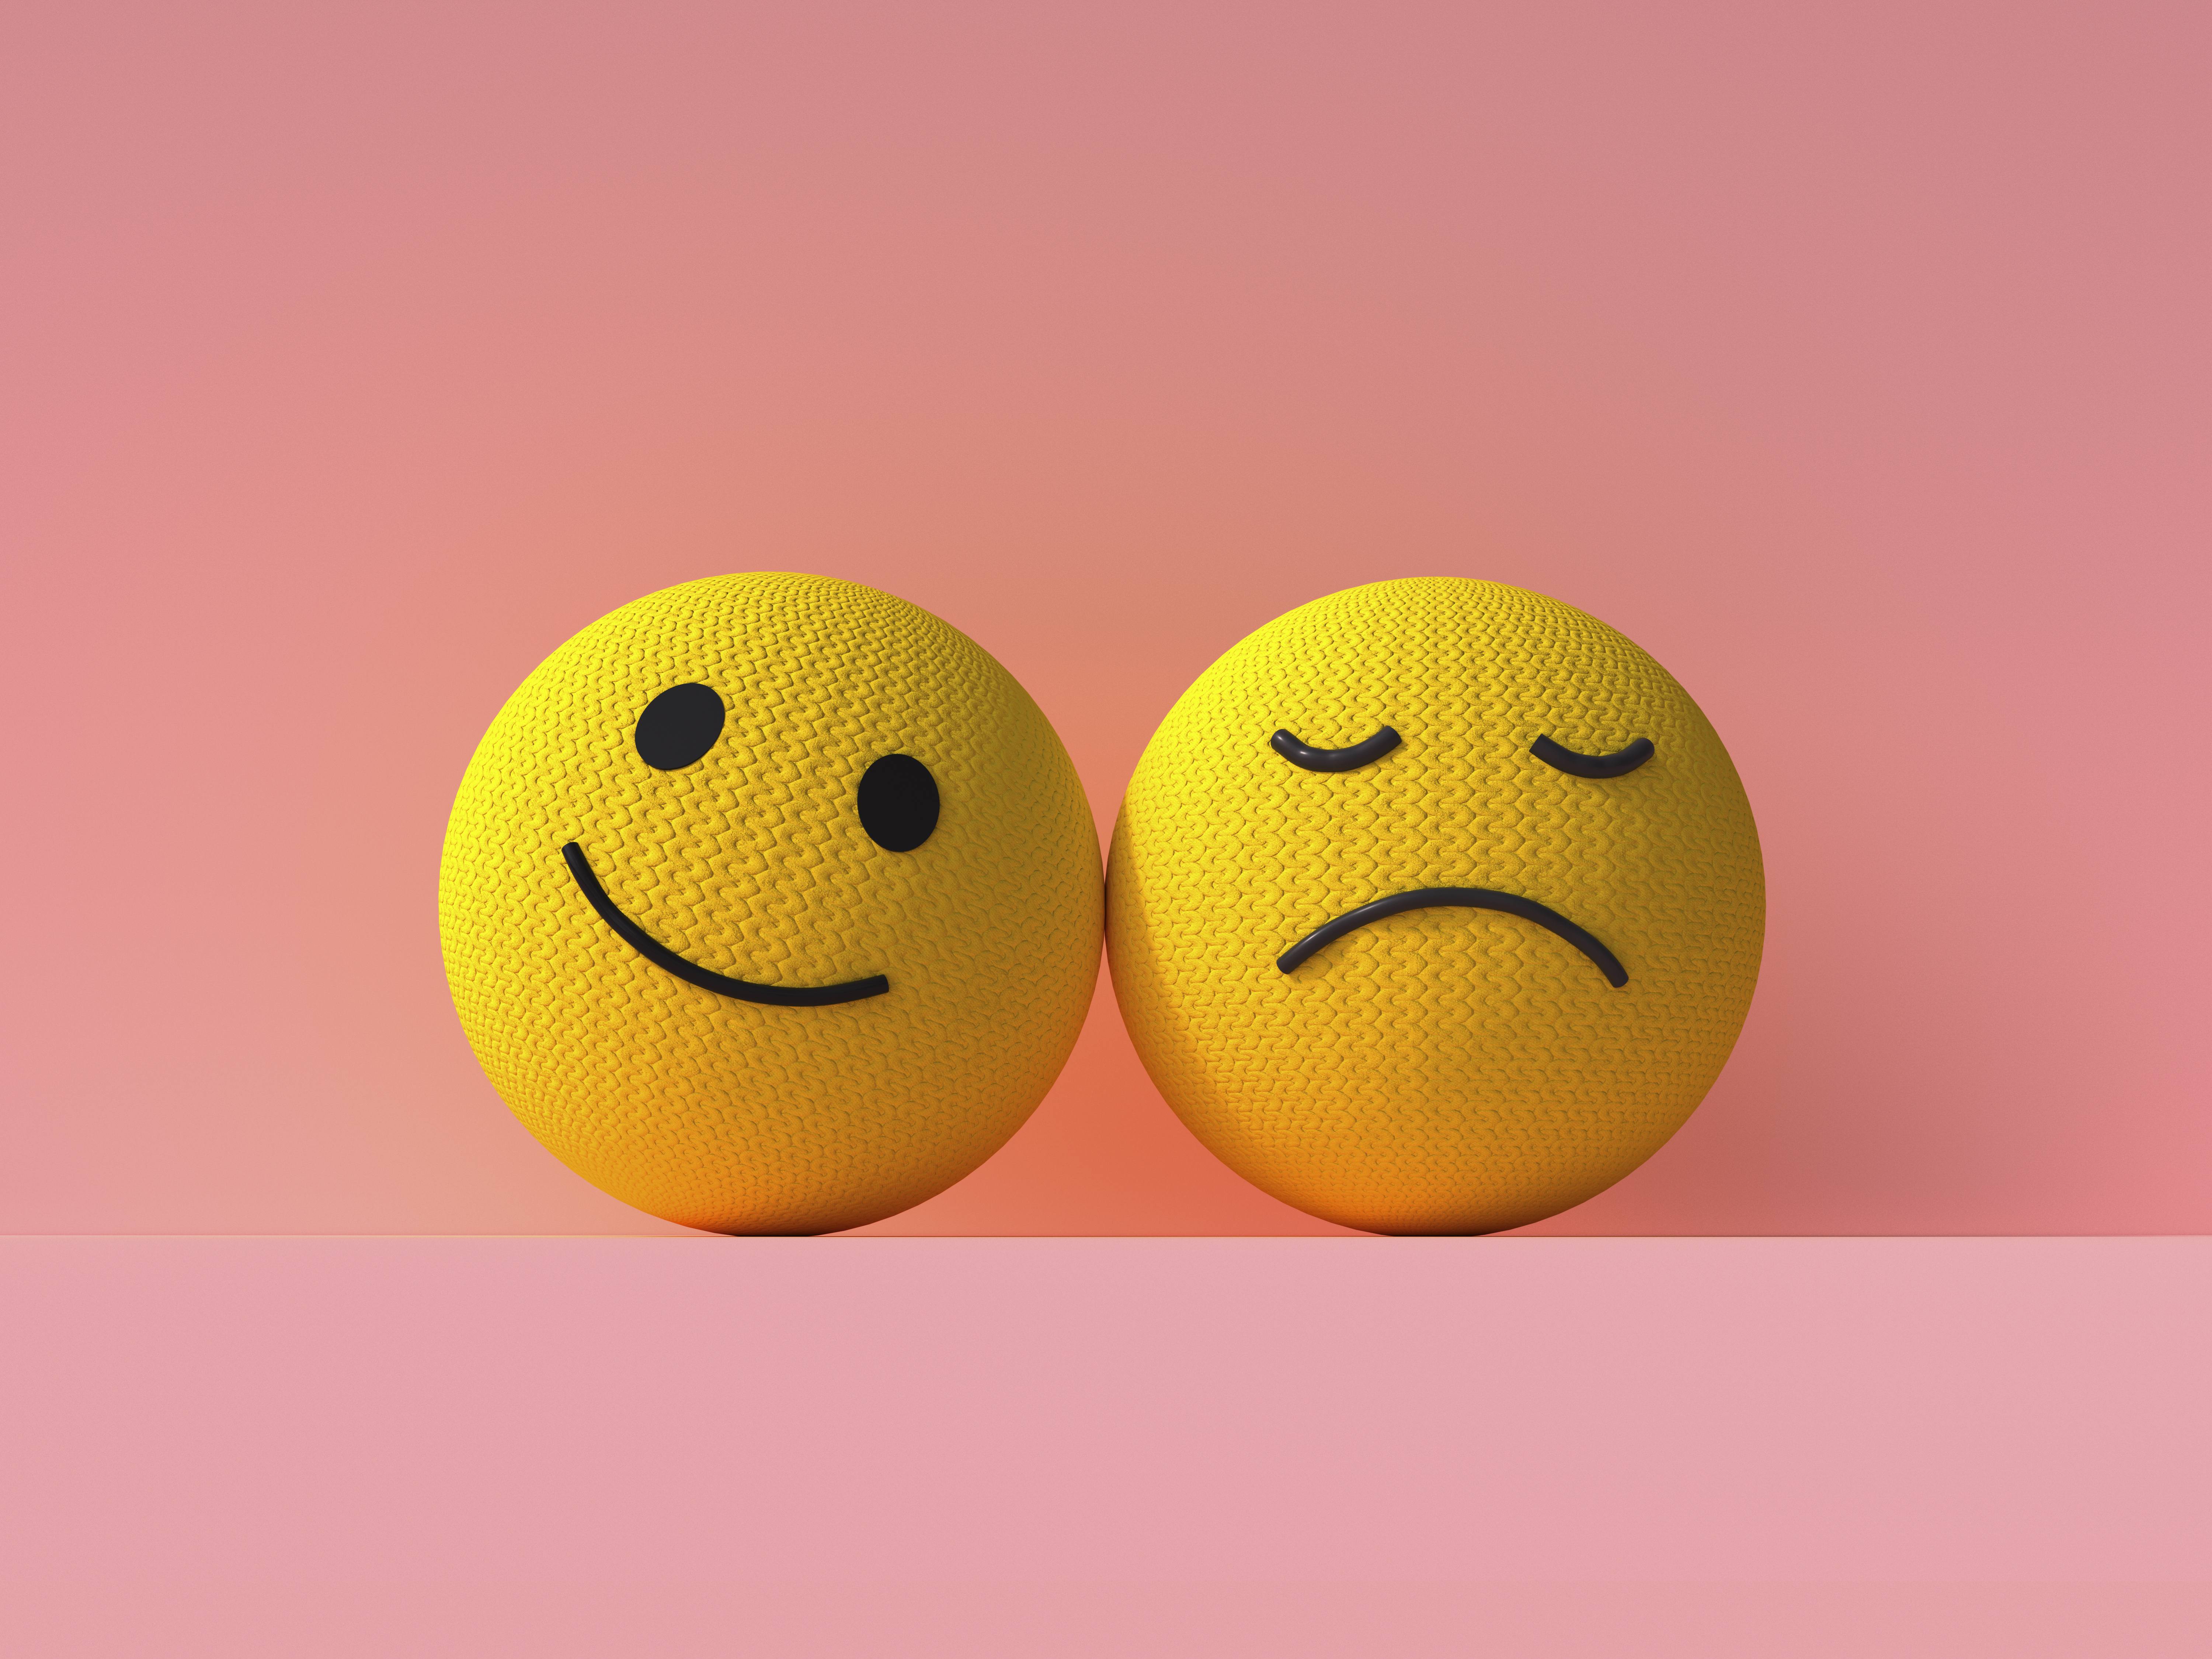 How to Tell the Difference Between Good and Bad Stress